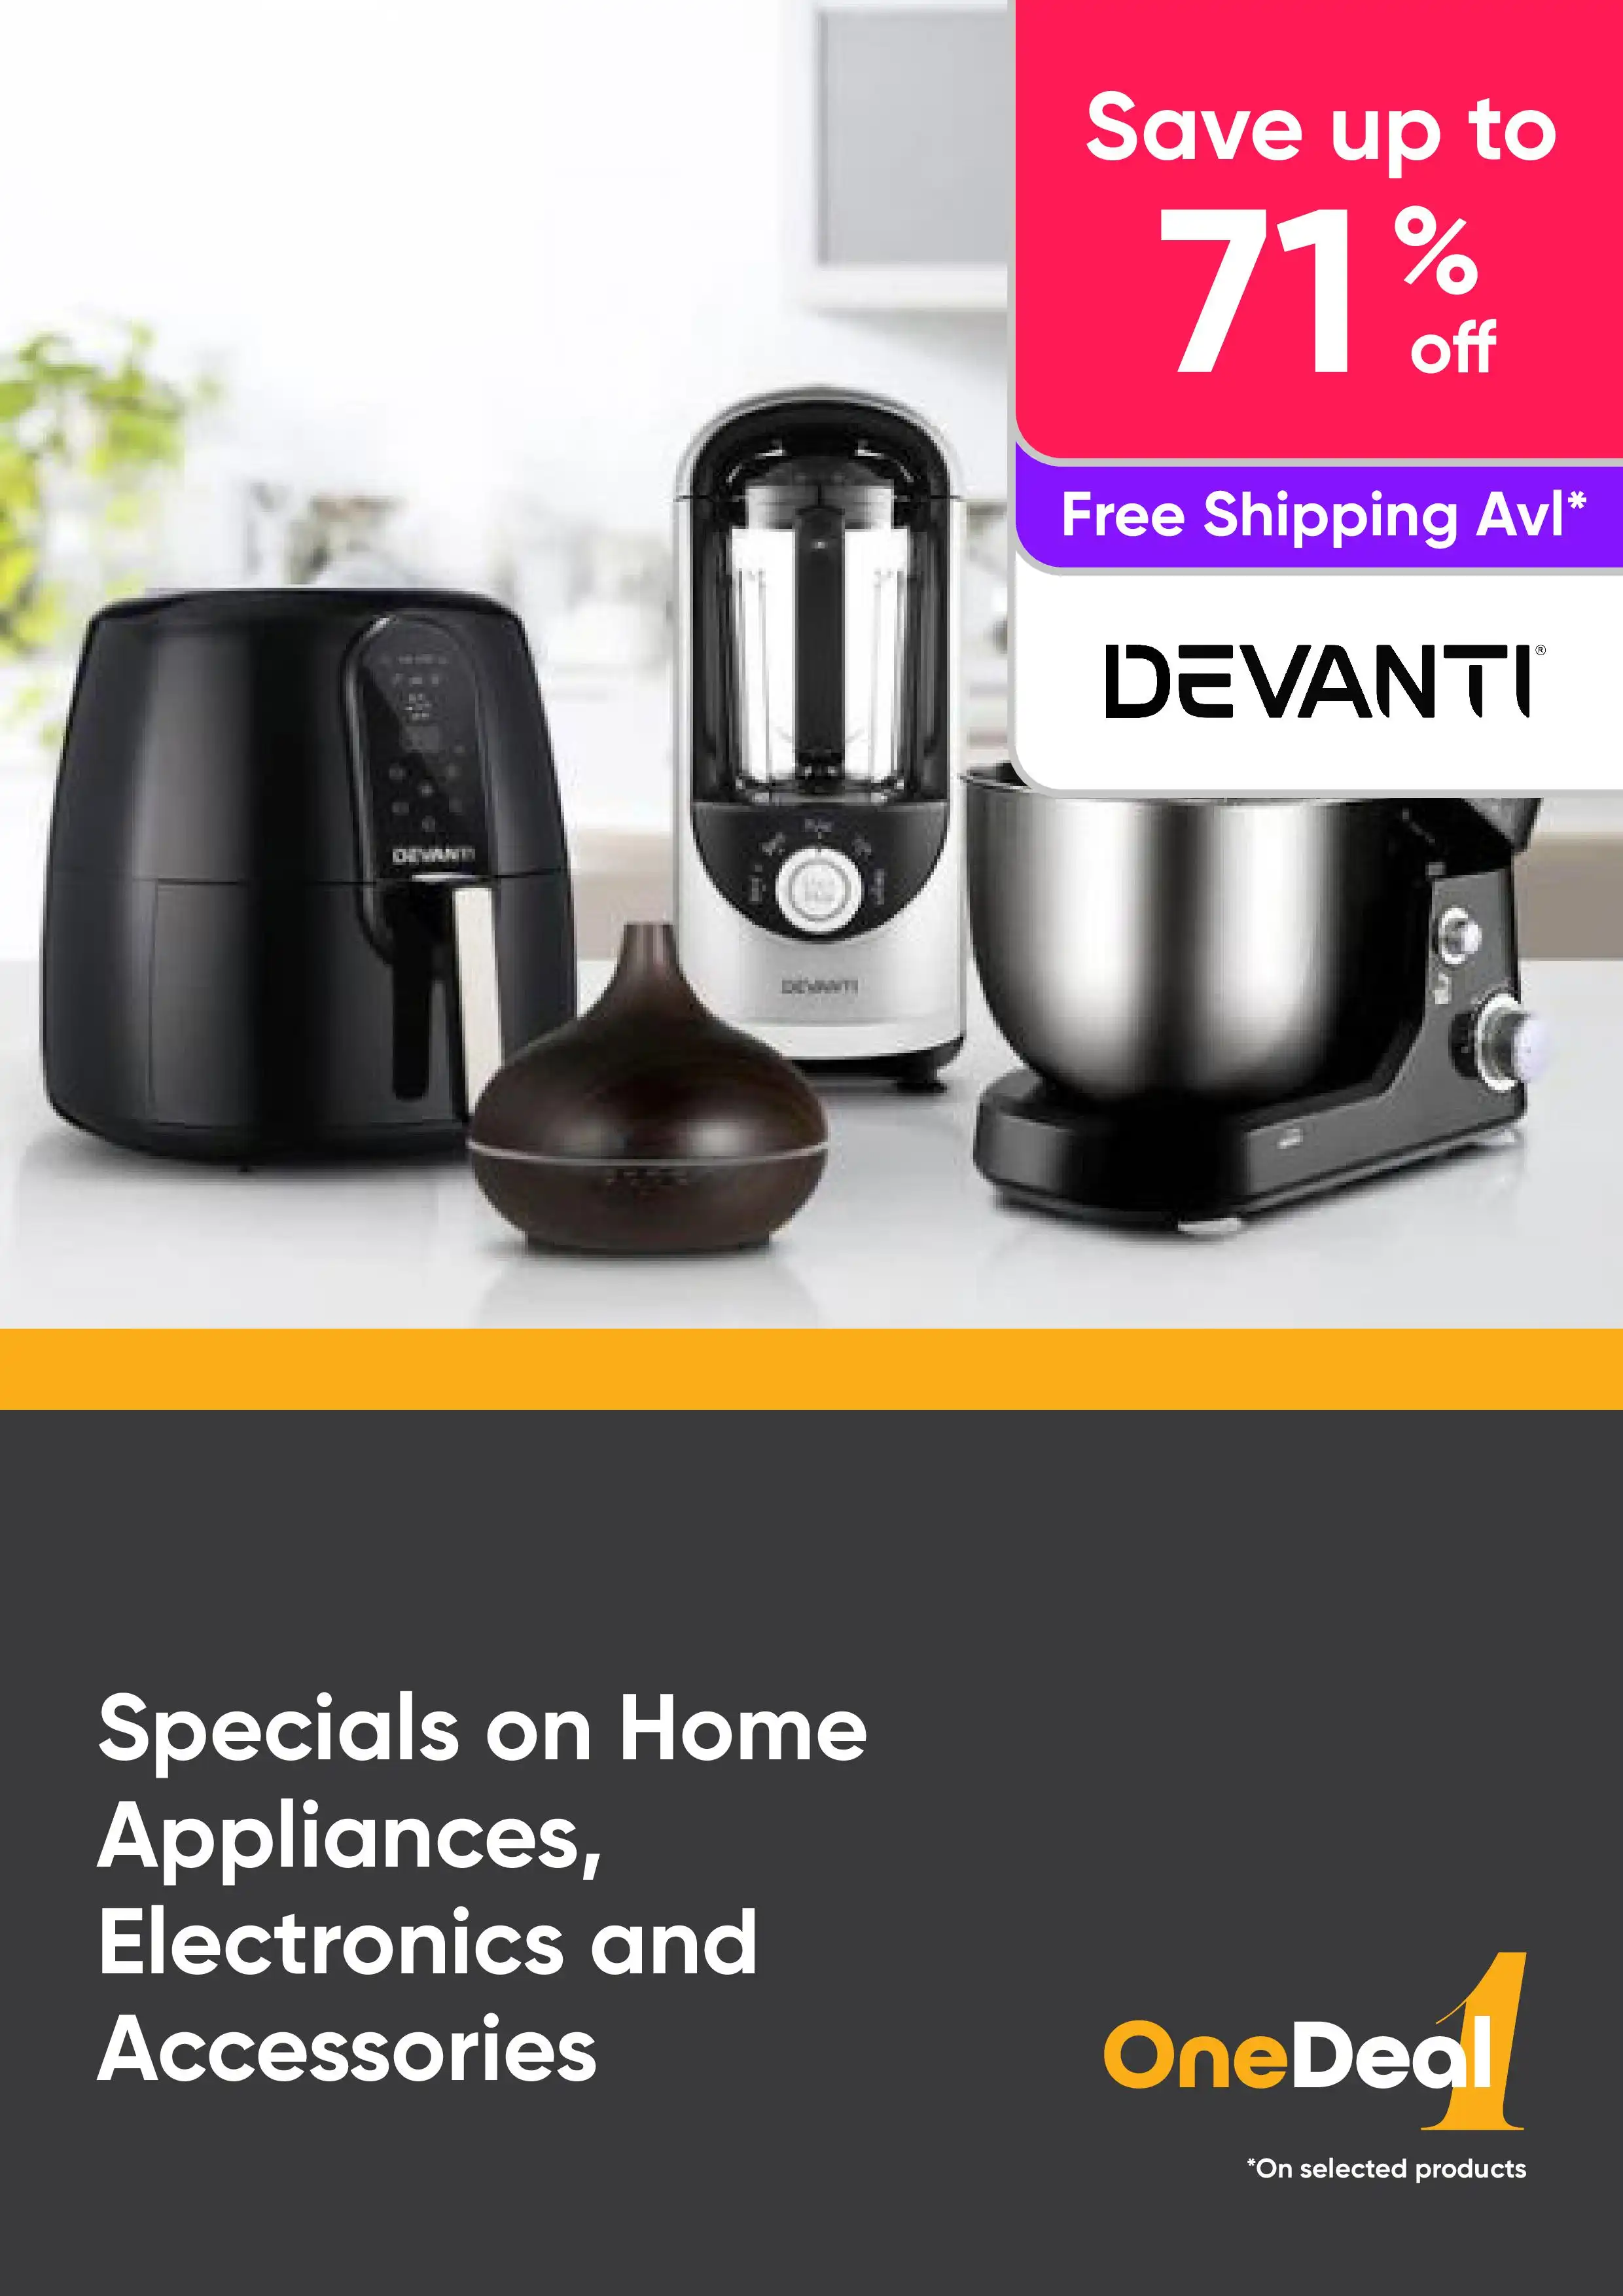 Shop Specials on Home Appliances, Electronics and Accessories - Save up to 71% Off